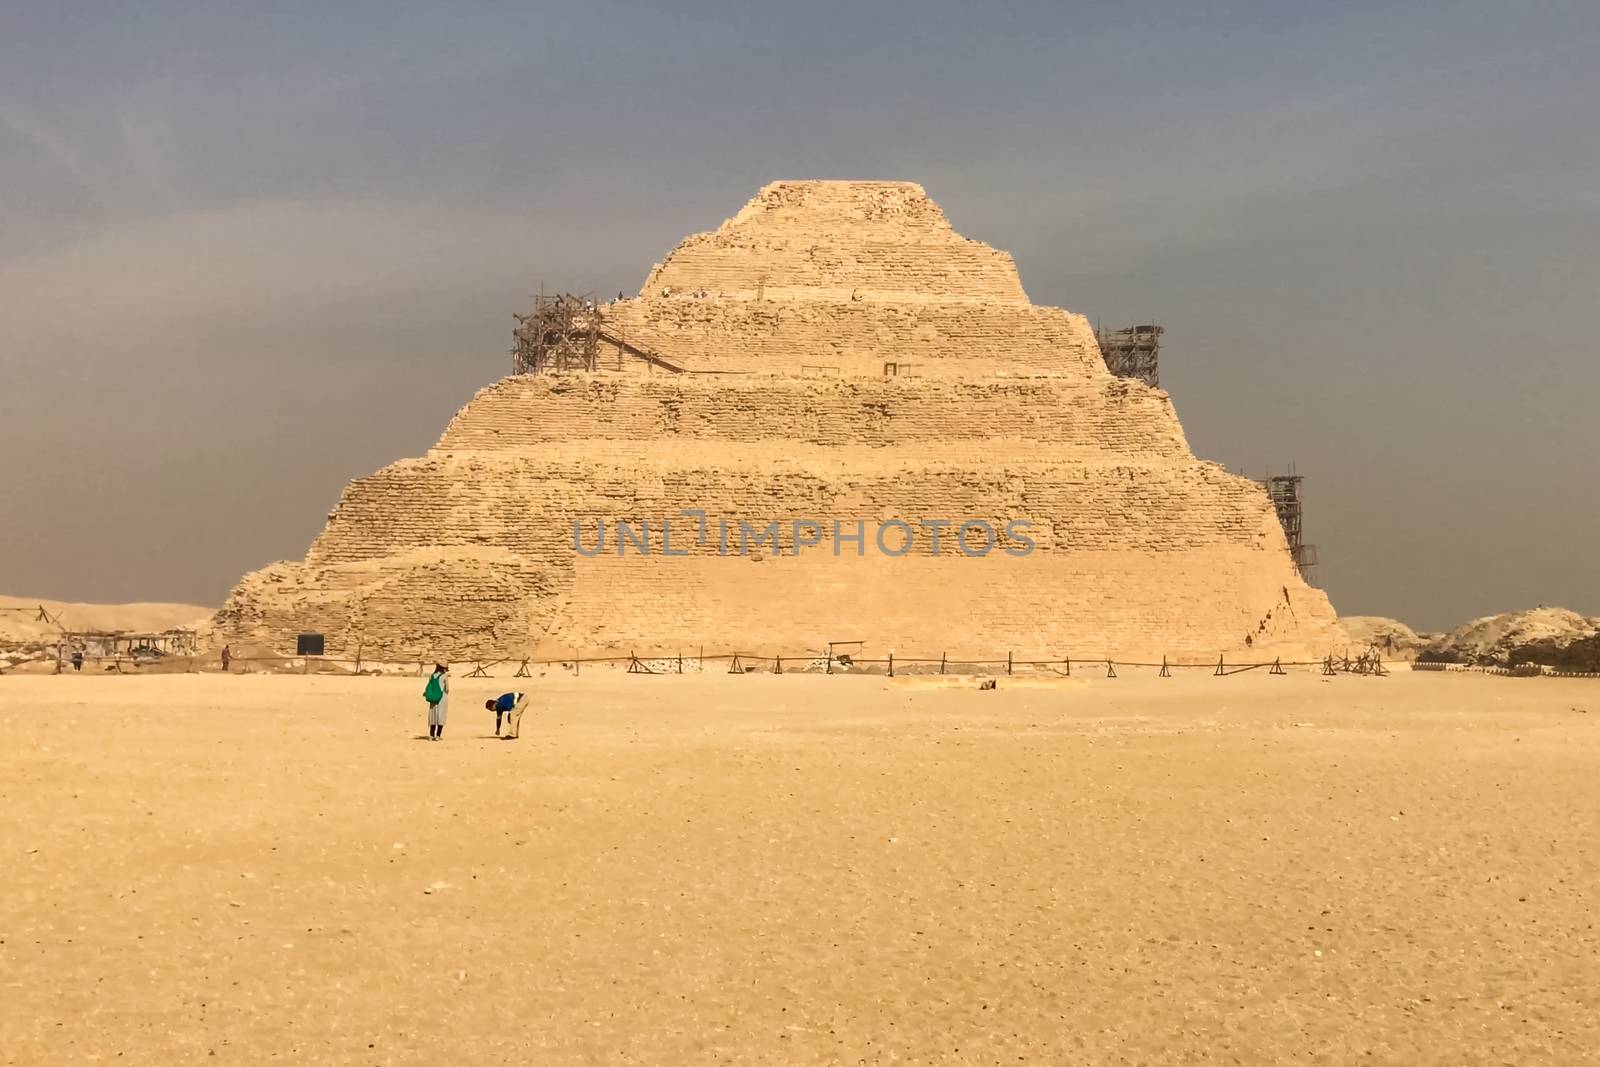 Pyramids of giza. Great pyramids of Egypt. The seventh wonder of the world. Ancient megaliths. by nyrok